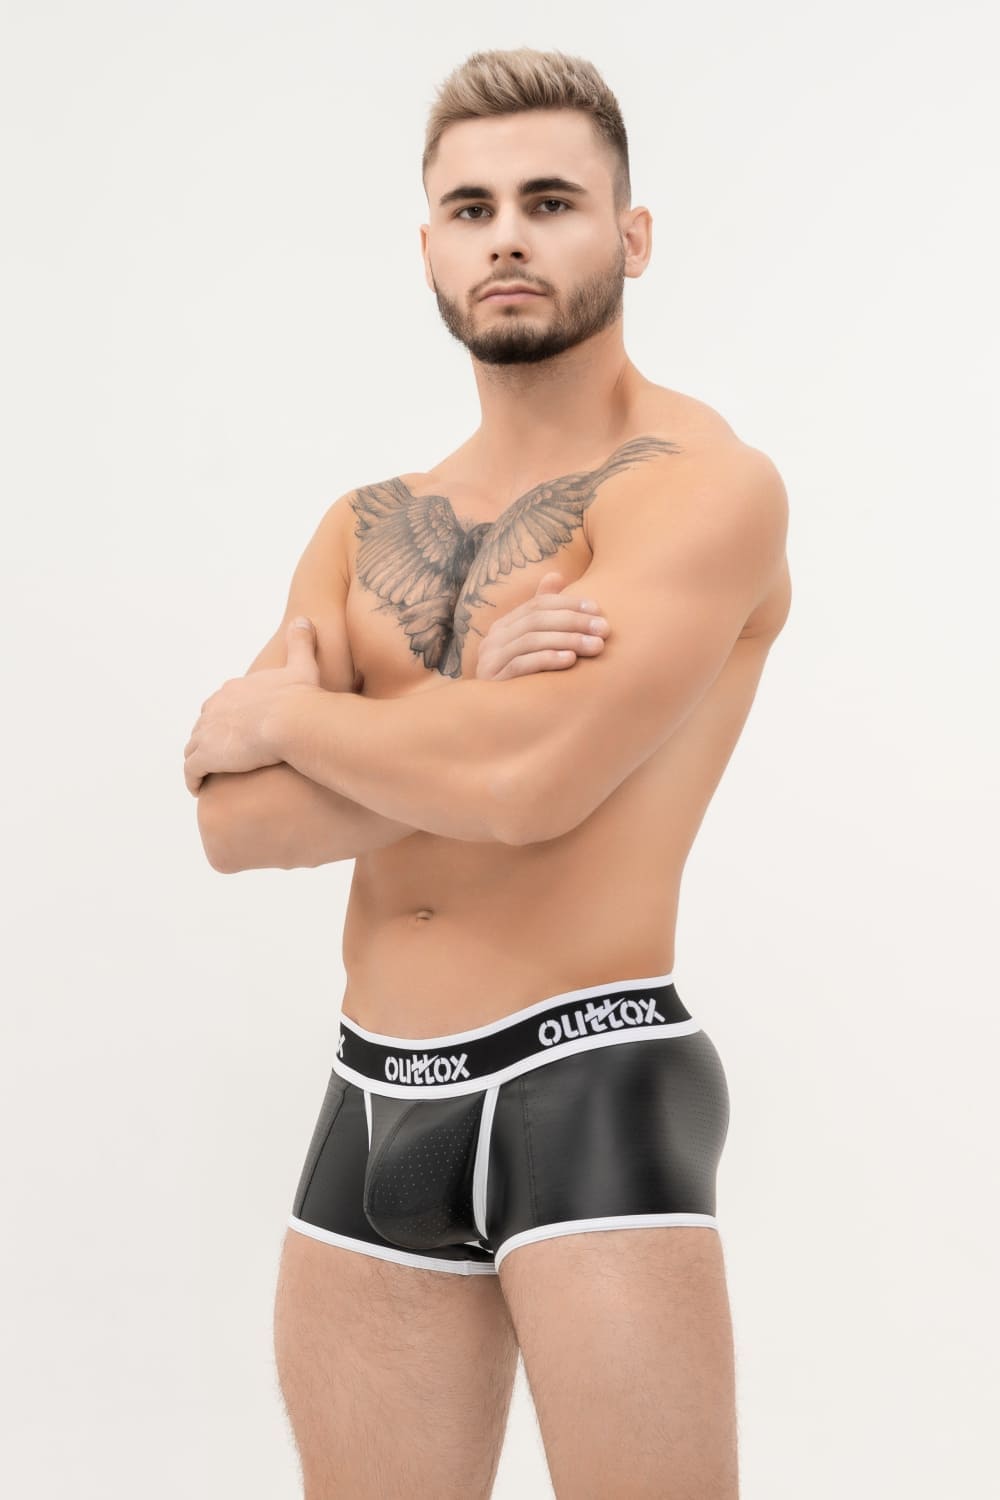 Outtox. Wrapped Rear Trunk Shorts with Snap Codpiece. Black+White